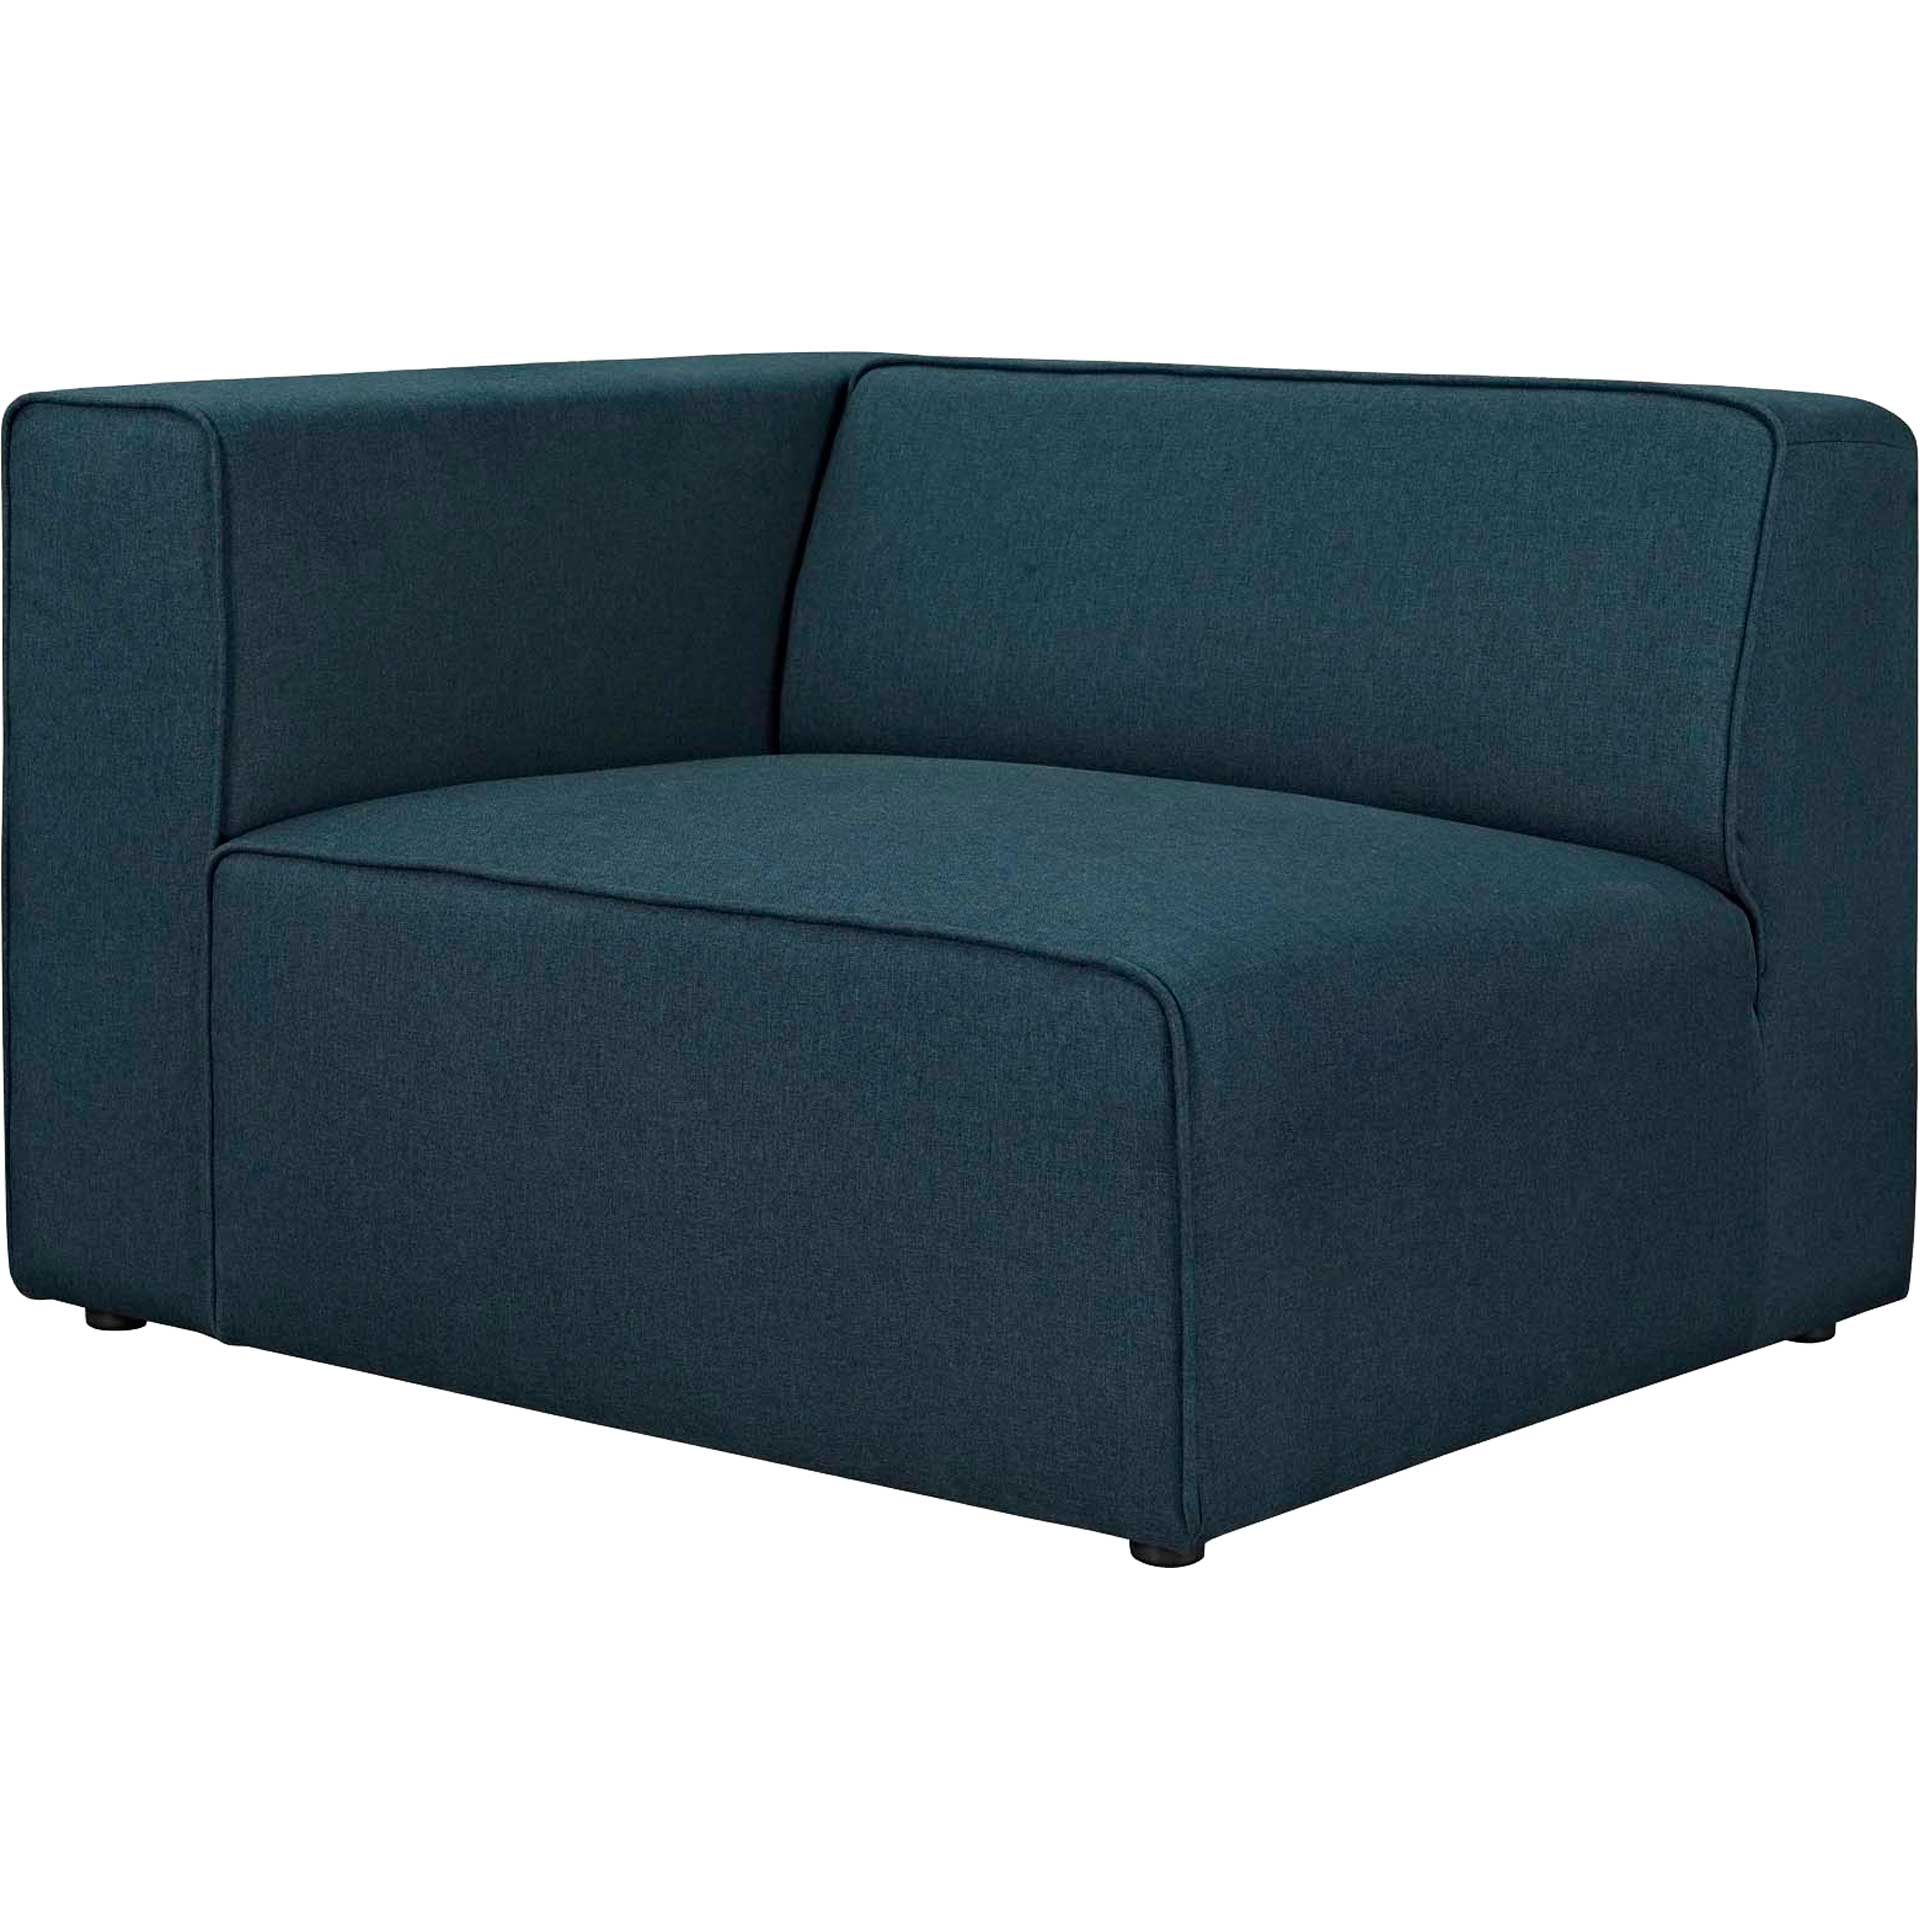 Maisie 7 Piece L-Shaped Sectional Sofa Blue